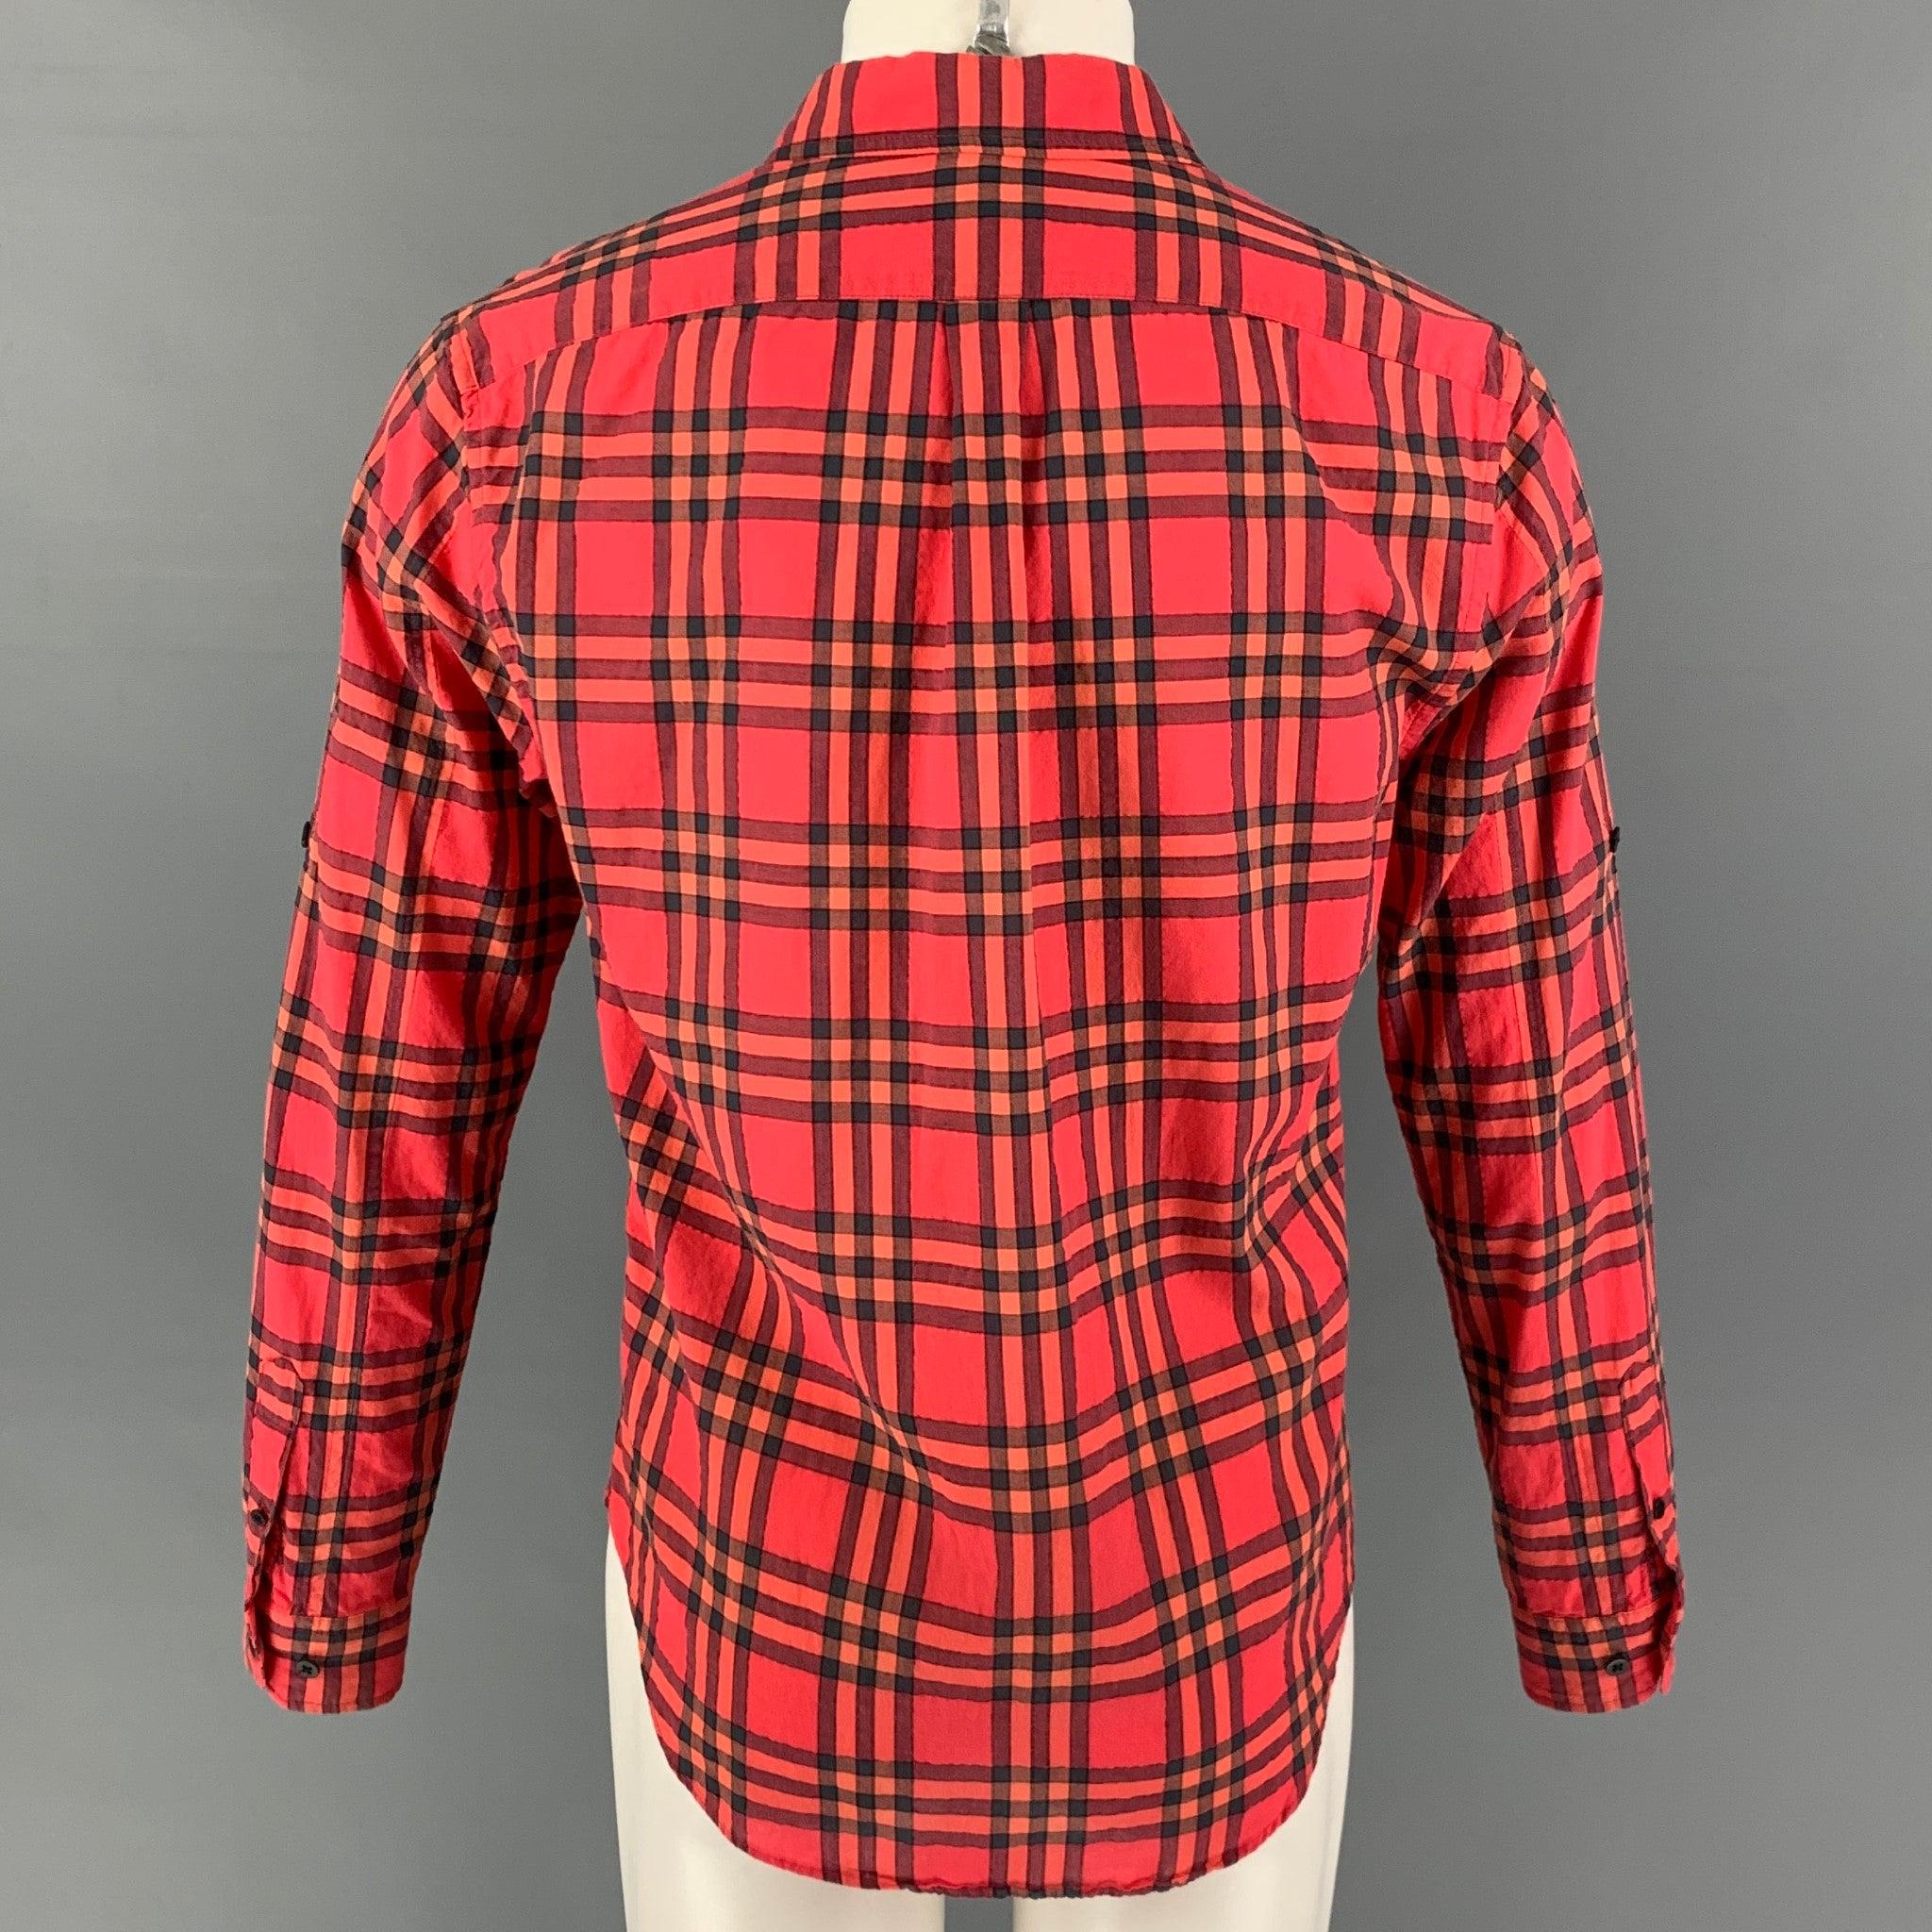 MARC JACOBS Size M Red Black Plaid Cotton Blend Button Up Long Sleeve Shirt In Good Condition For Sale In San Francisco, CA